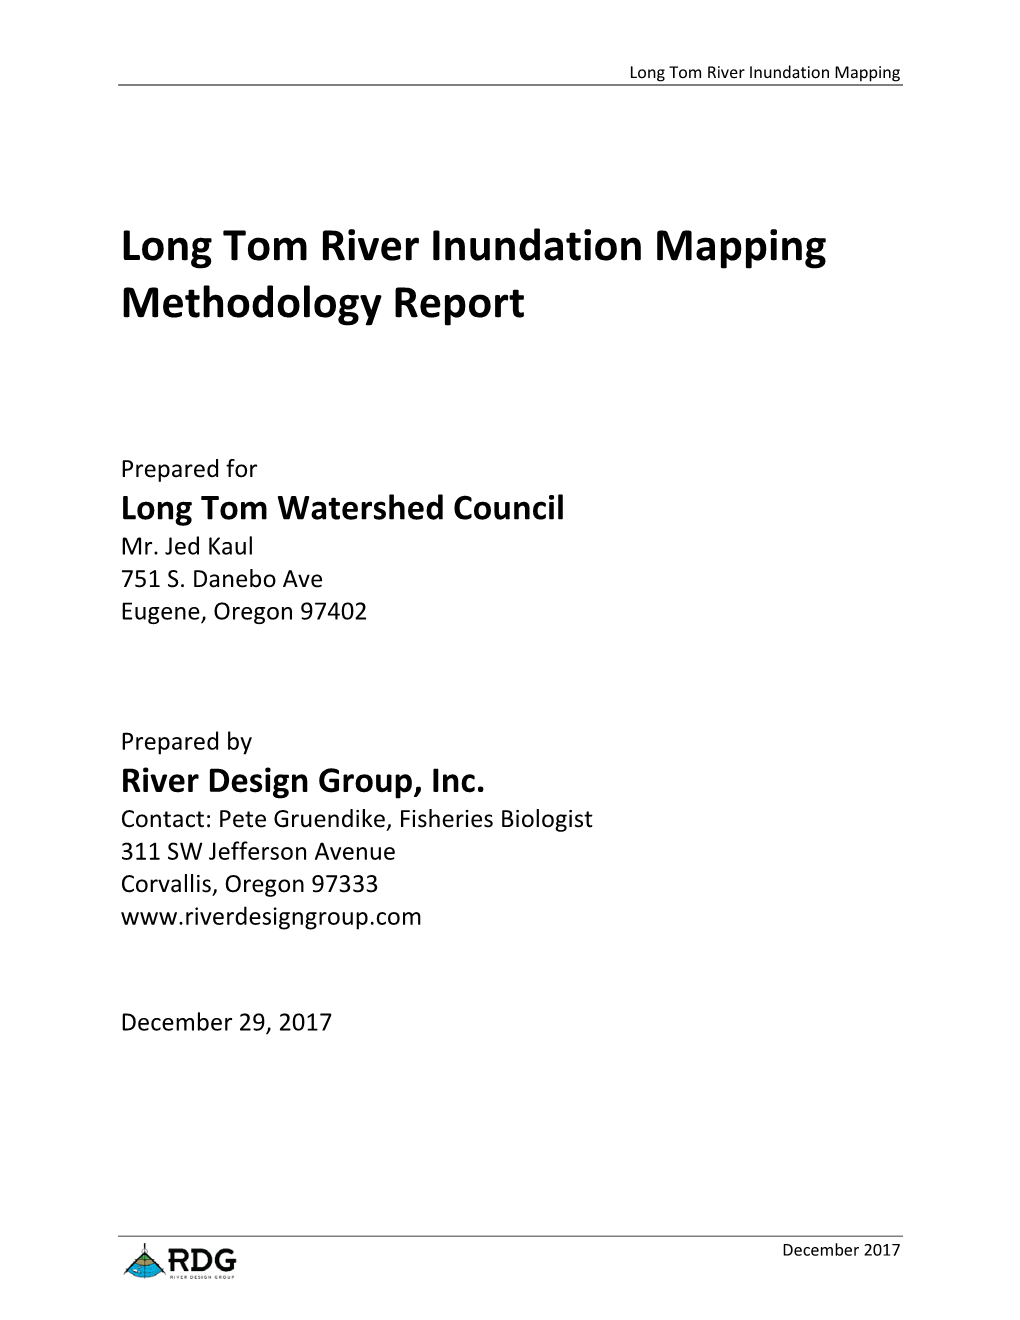 Long Tom River Inundation Mapping Methodology Report